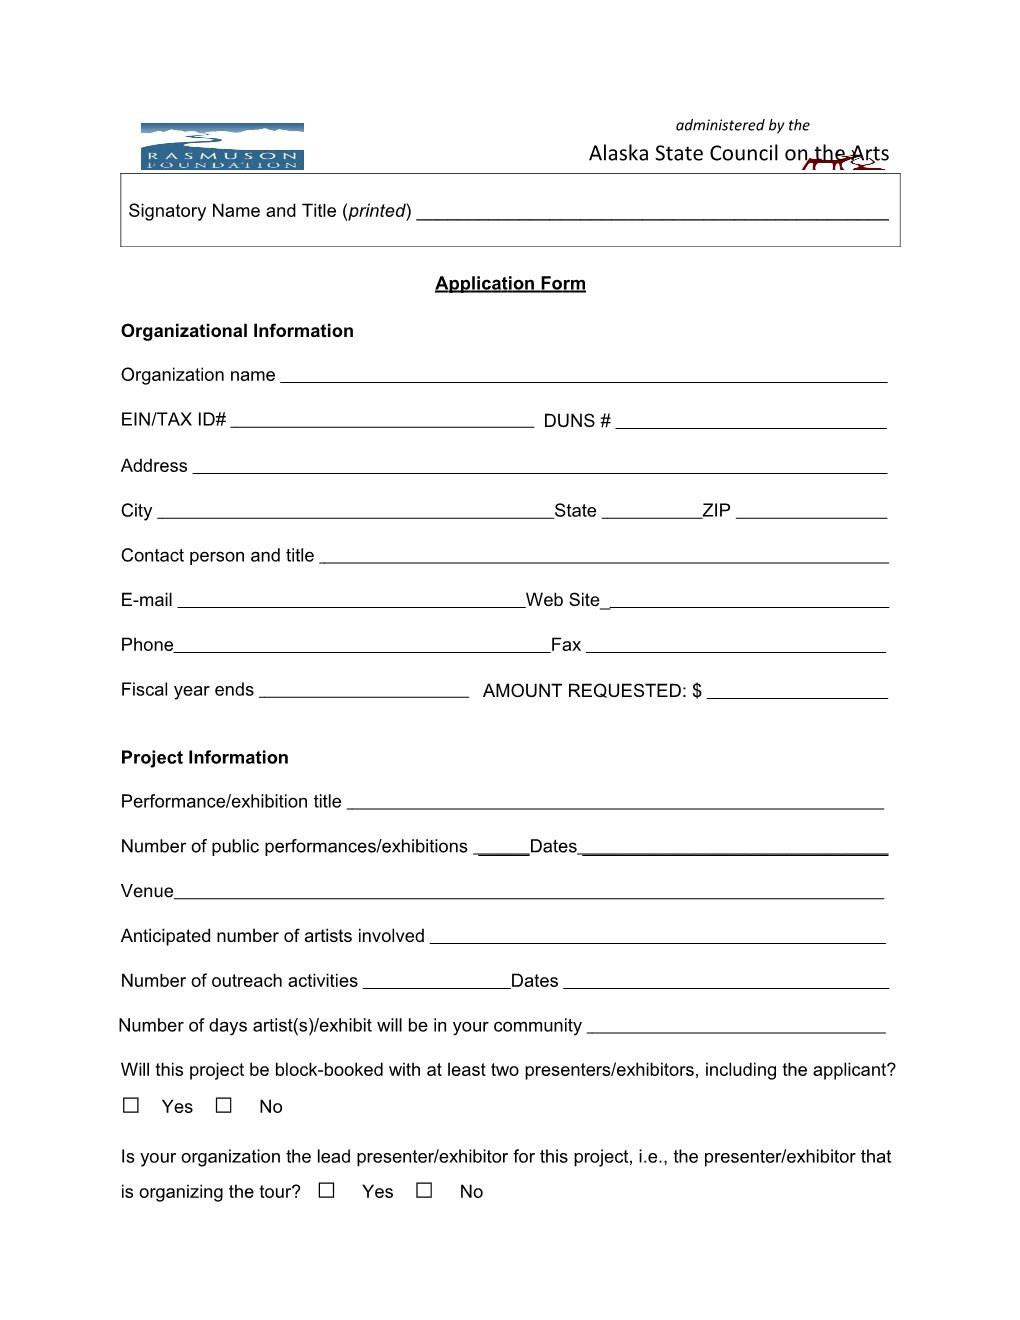 Grant Application for Performing Arts Presenters And